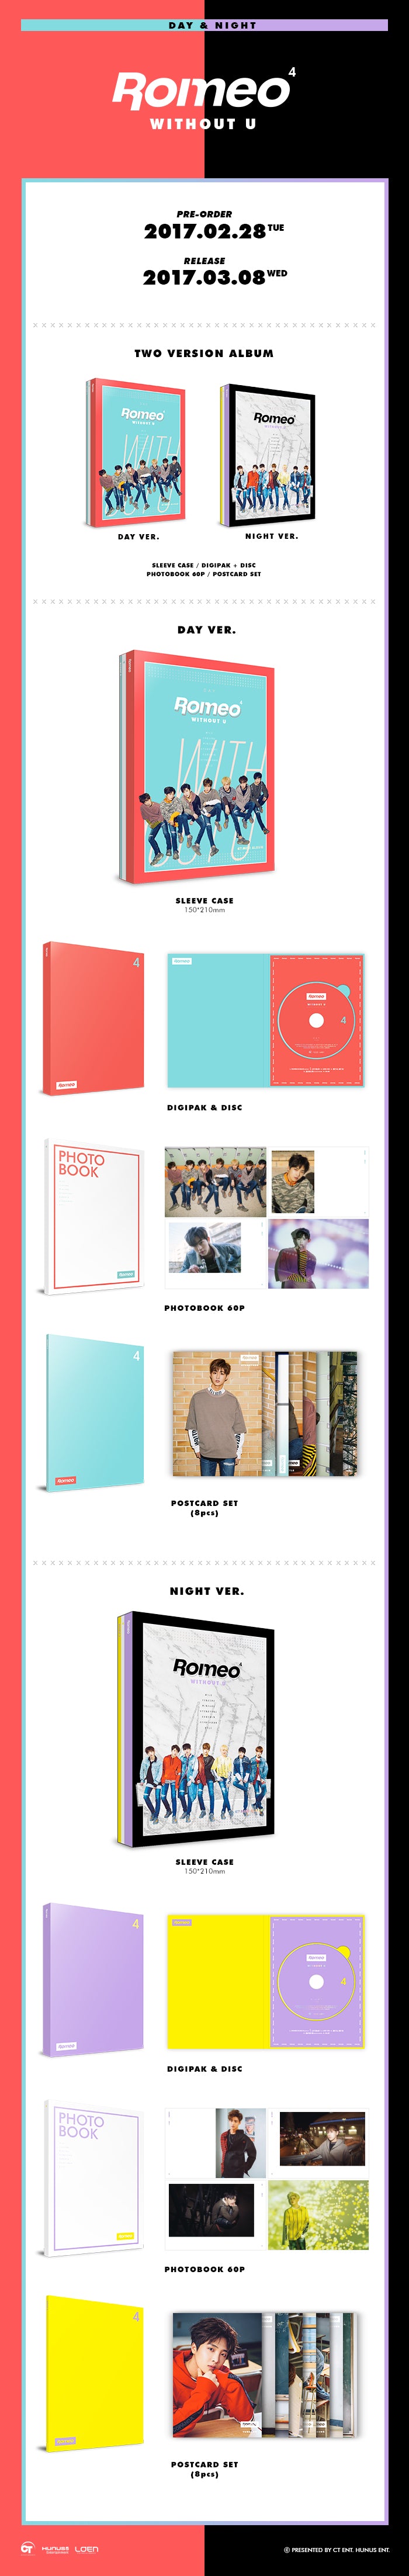 1 CD
1 Photo Book (60 pages)
8 Postcards